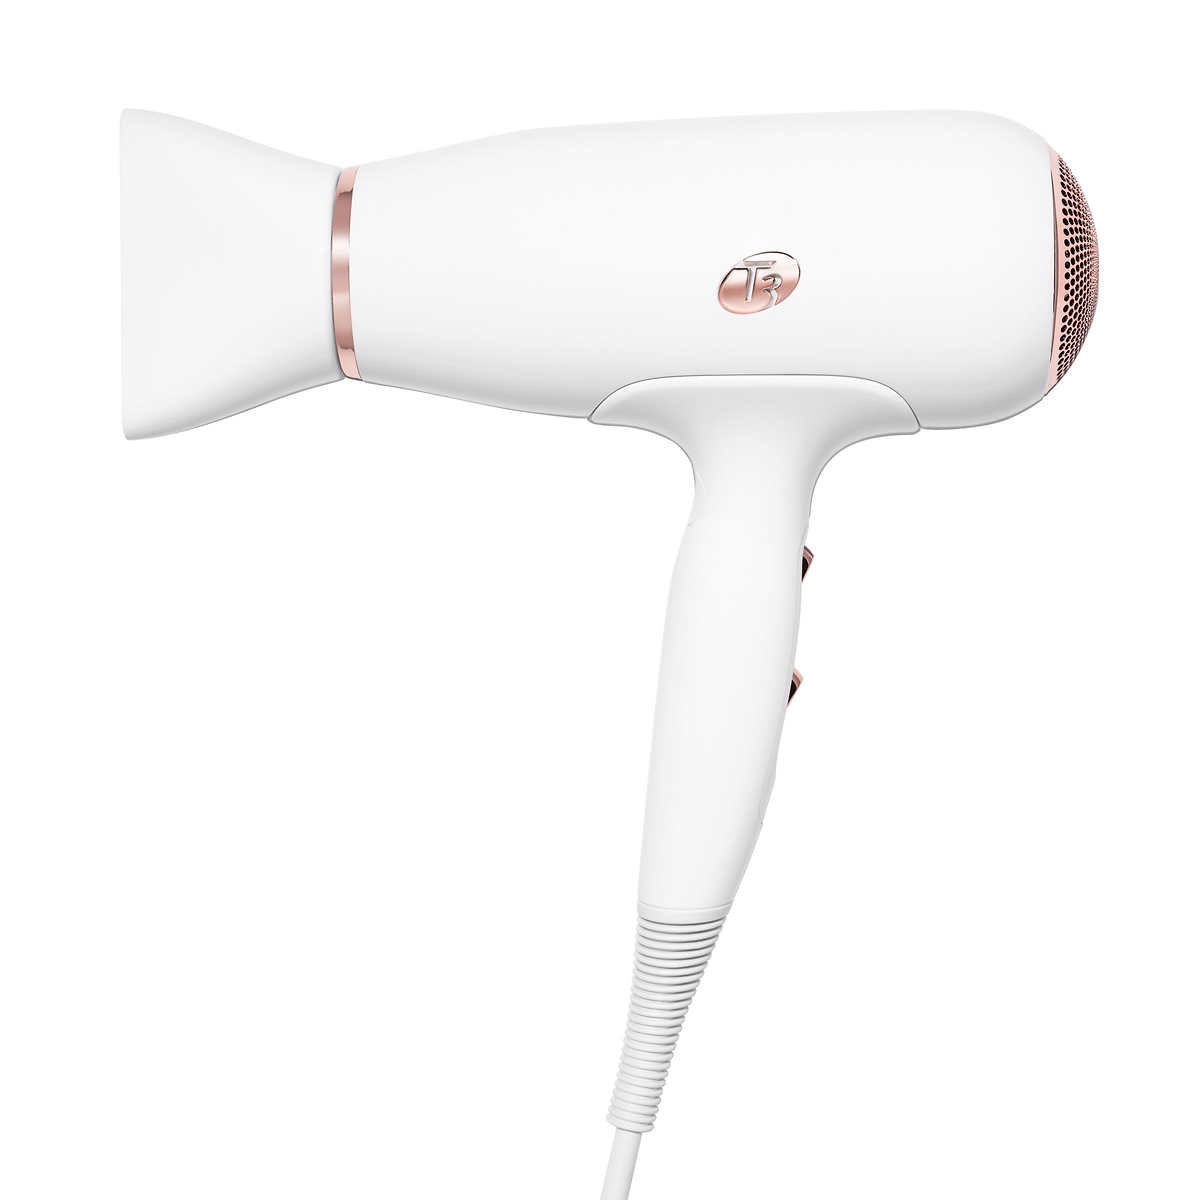 T3 Featherweight 3i Hair Dryer
T3 吹风机